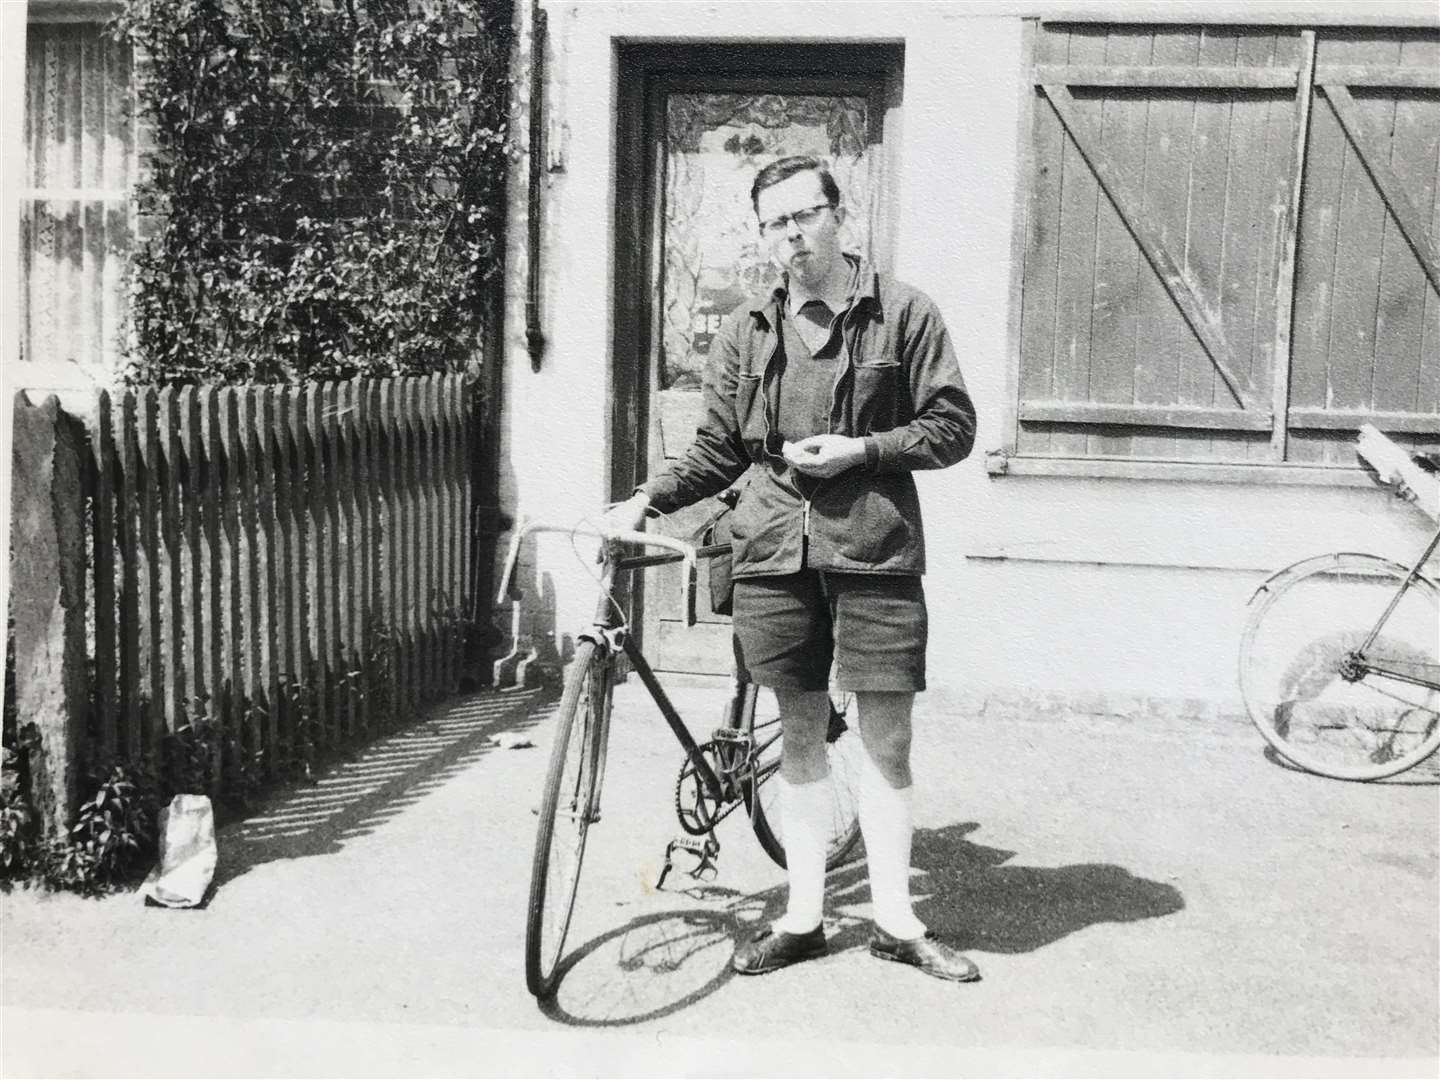 Peter Newman was a keen cyclist in the 1950s